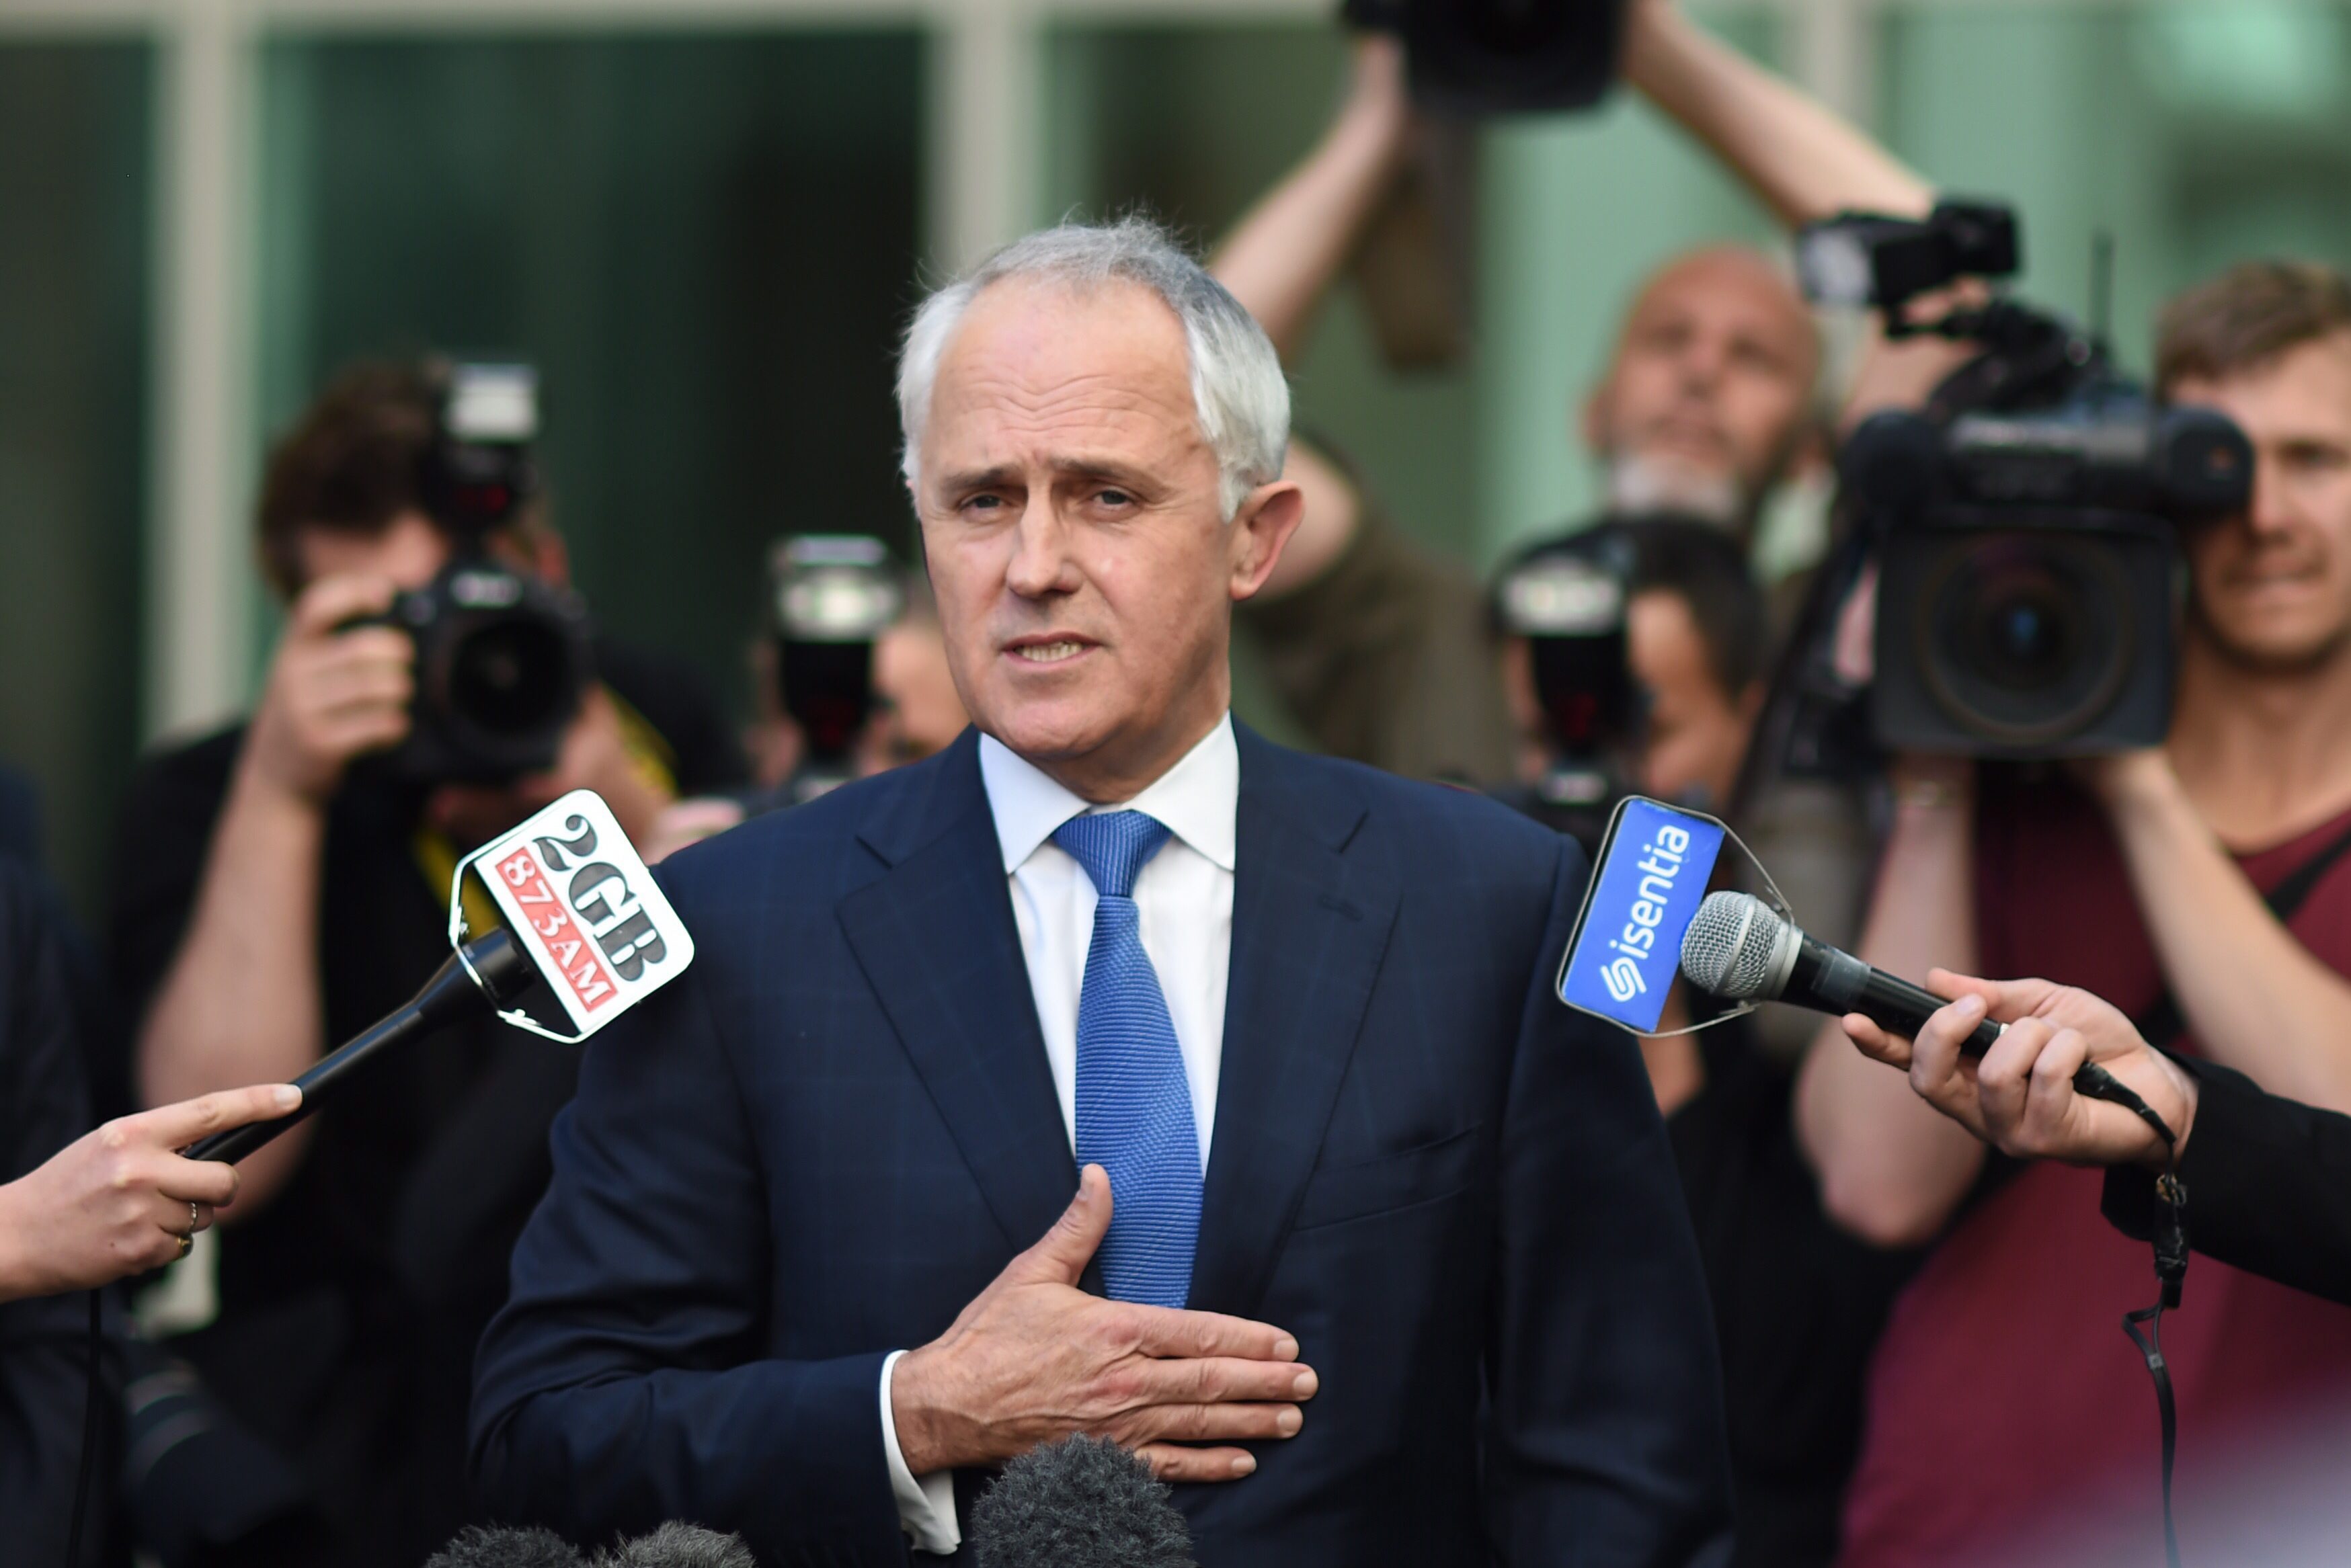 Malcolm Turnbull is a more nuanced thinker than the man he replaced. Photo: EPA